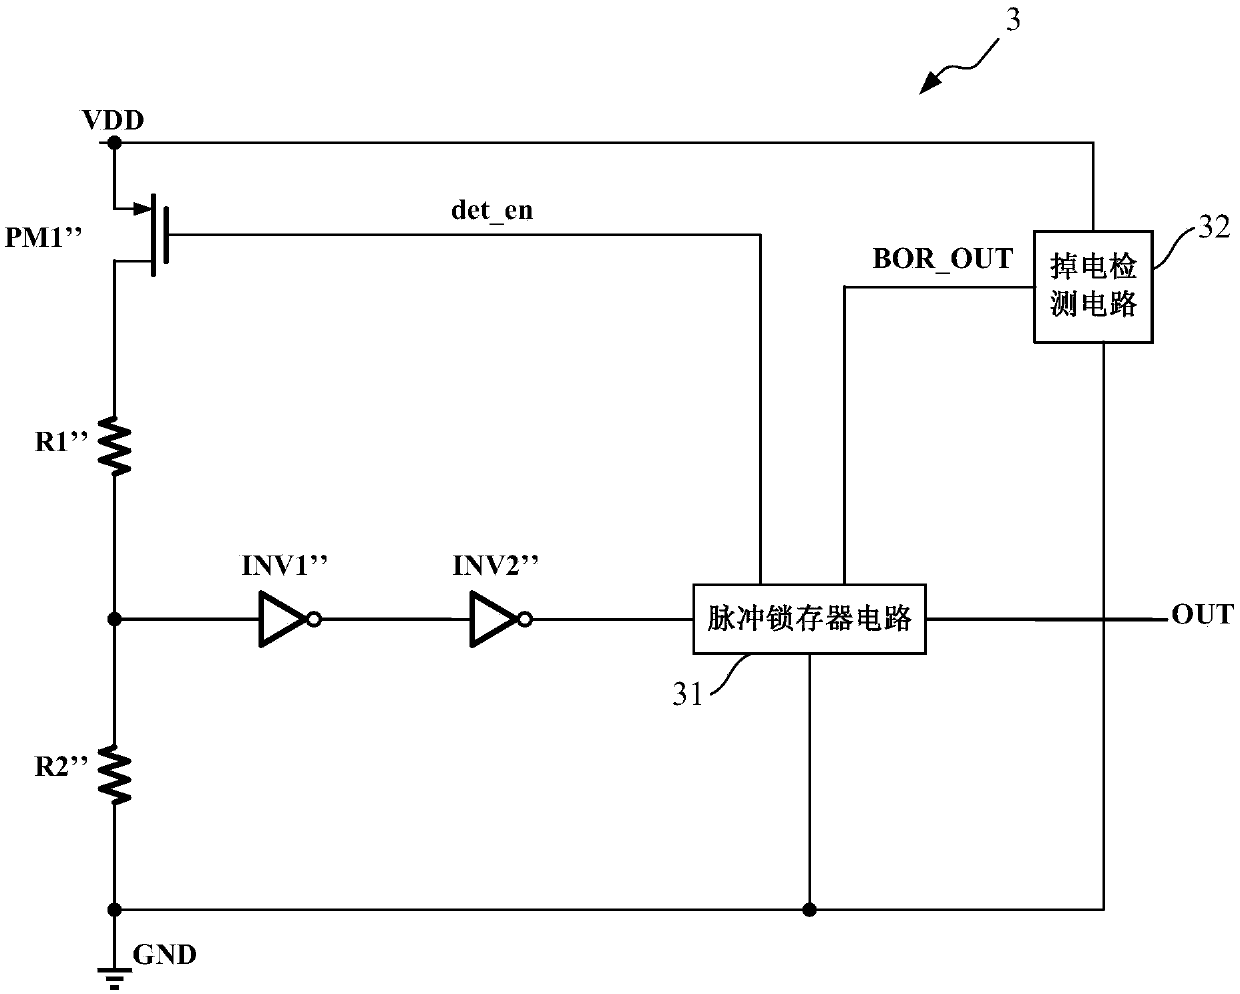 Power detection circuit and method